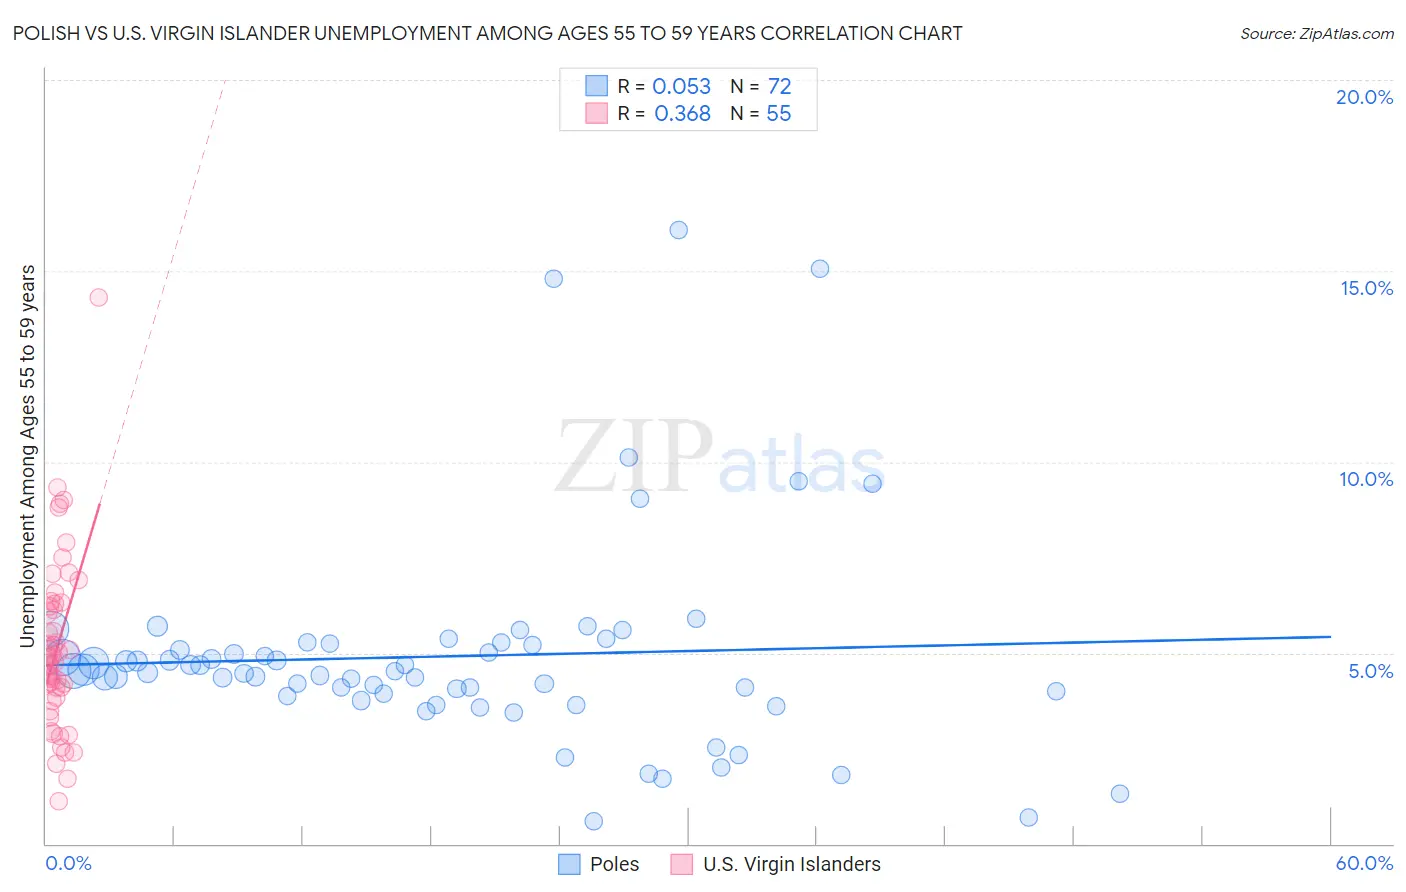 Polish vs U.S. Virgin Islander Unemployment Among Ages 55 to 59 years